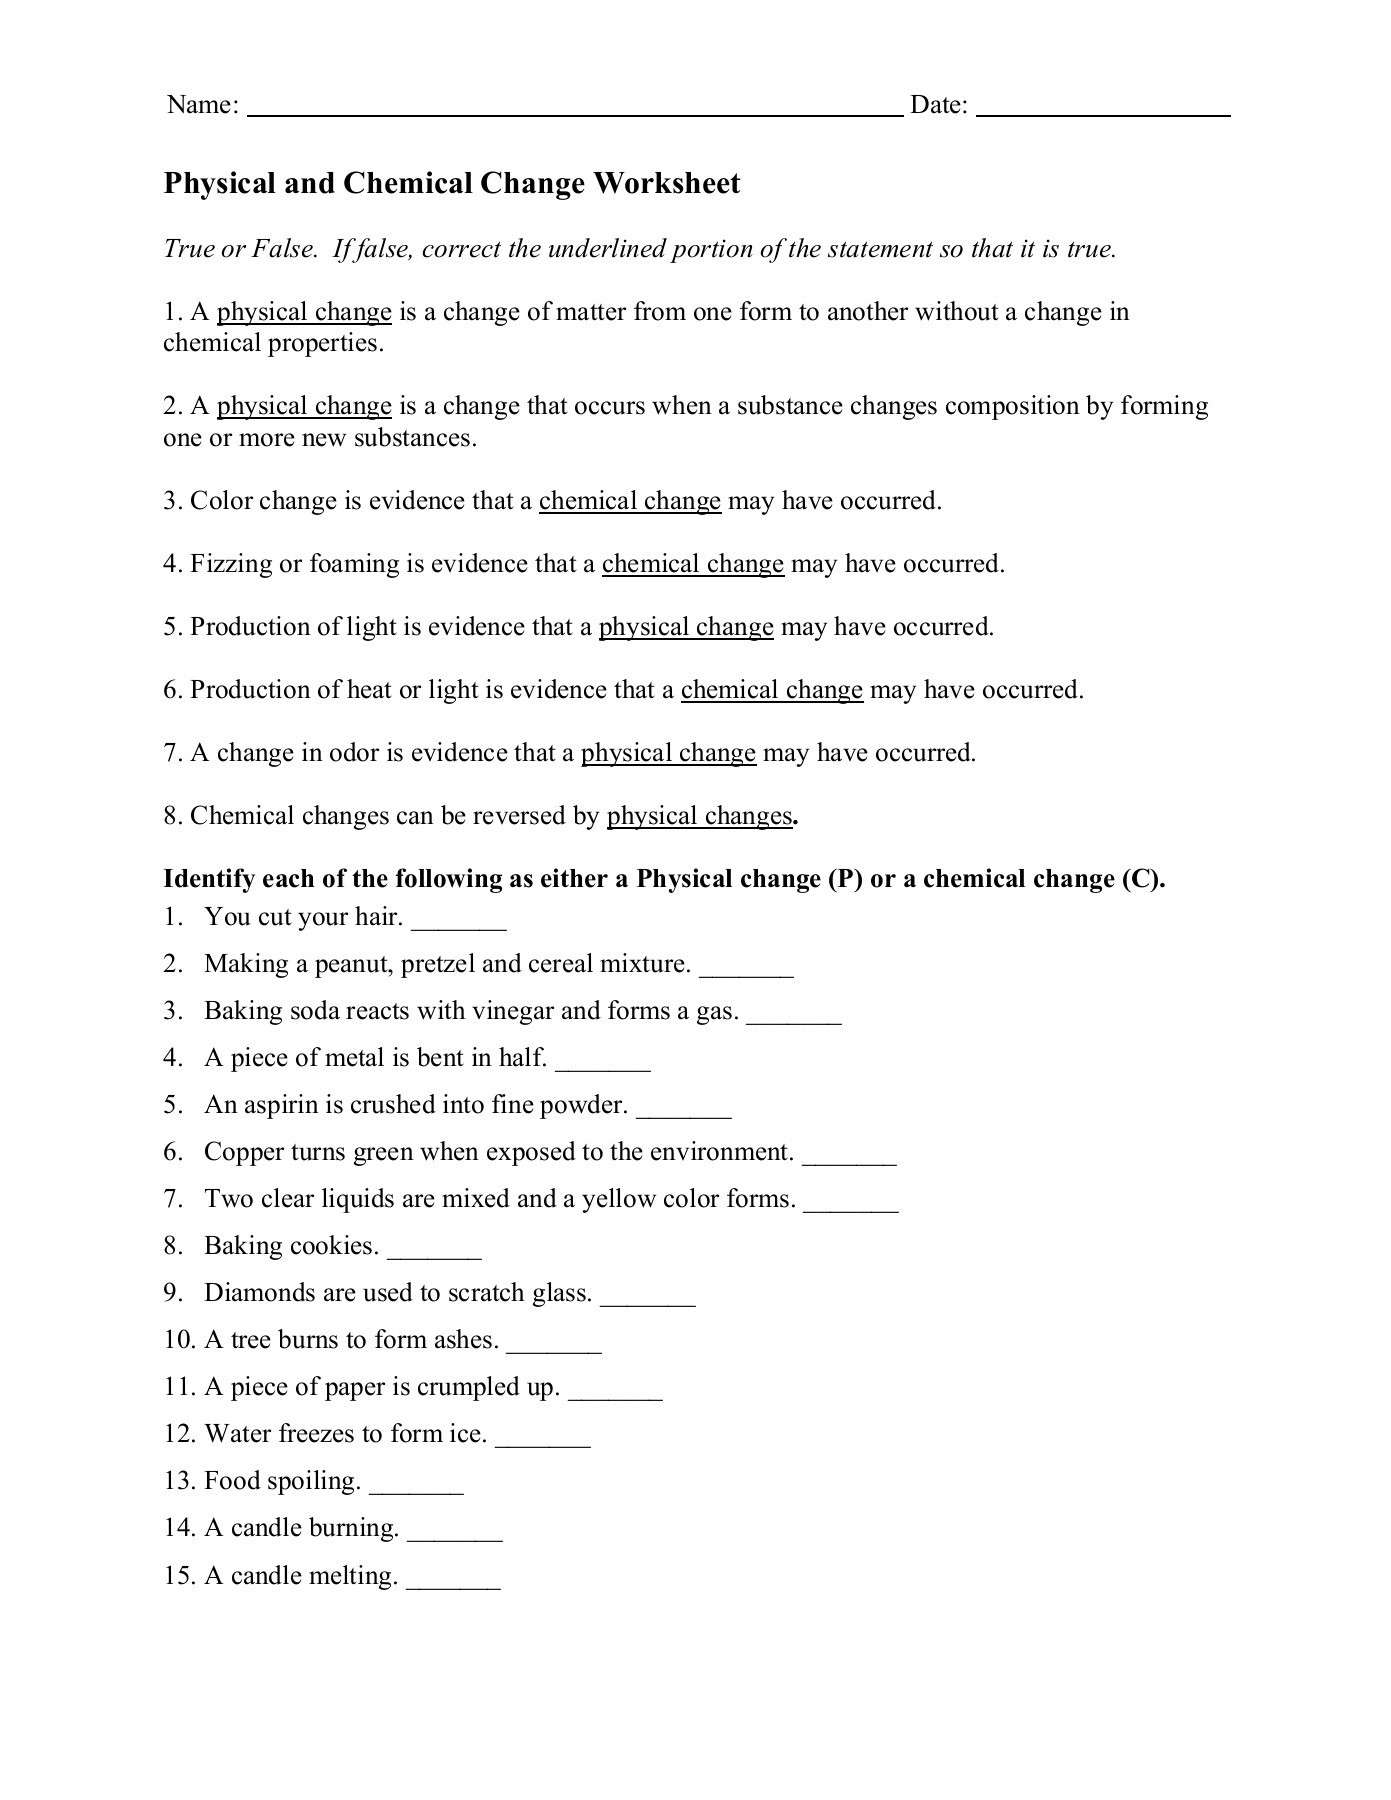 Chemical and Physical Changes Worksheet Physical and Chemical Change Worksheet